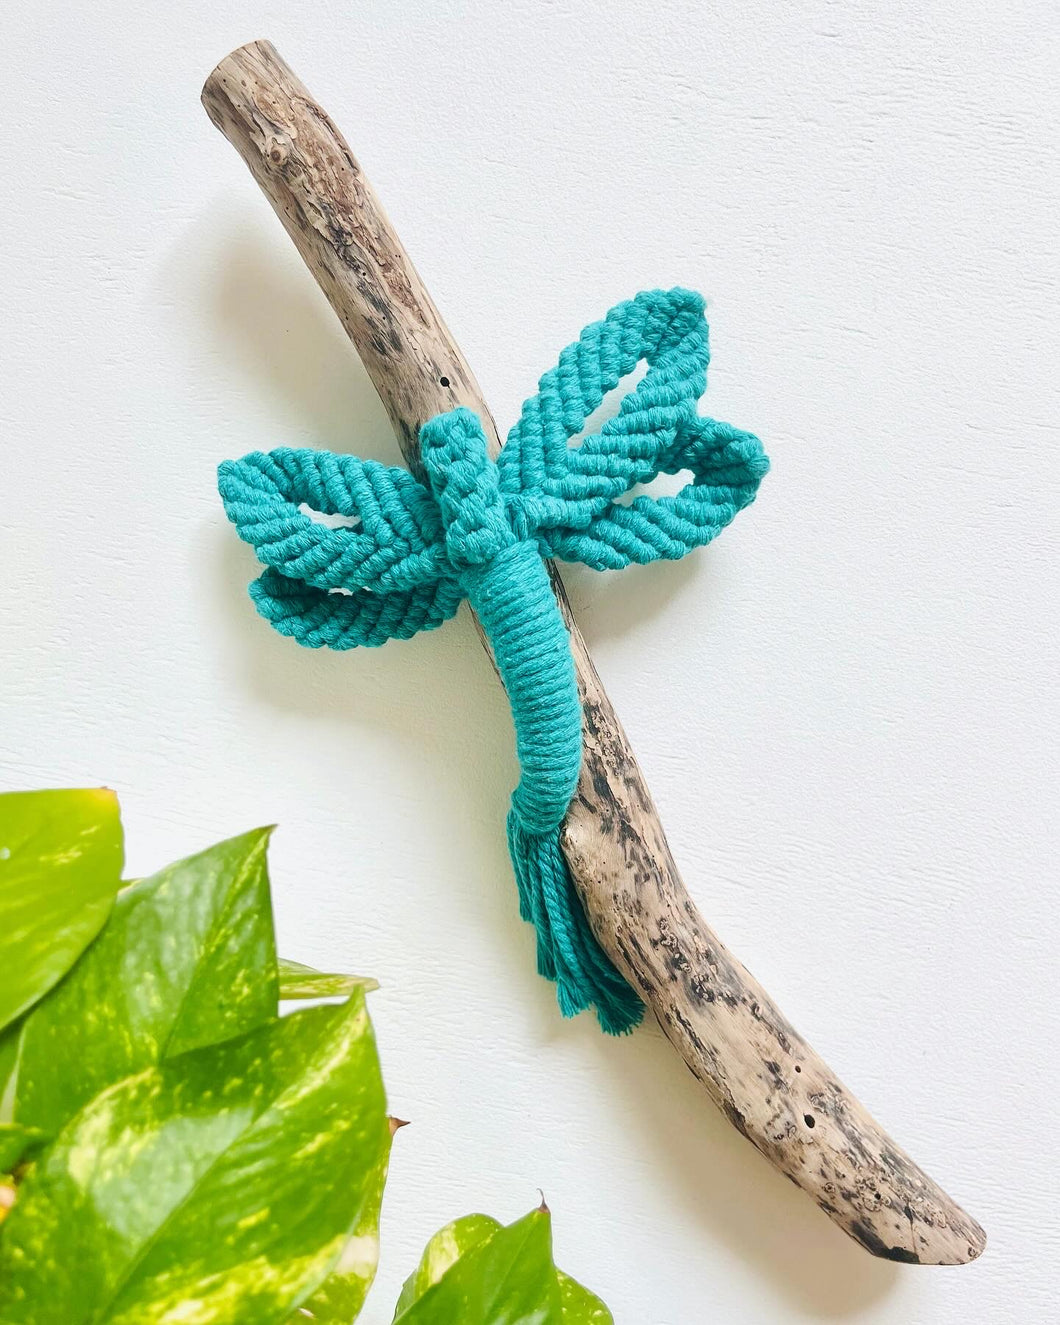 Teal Dragonfly on Driftwood